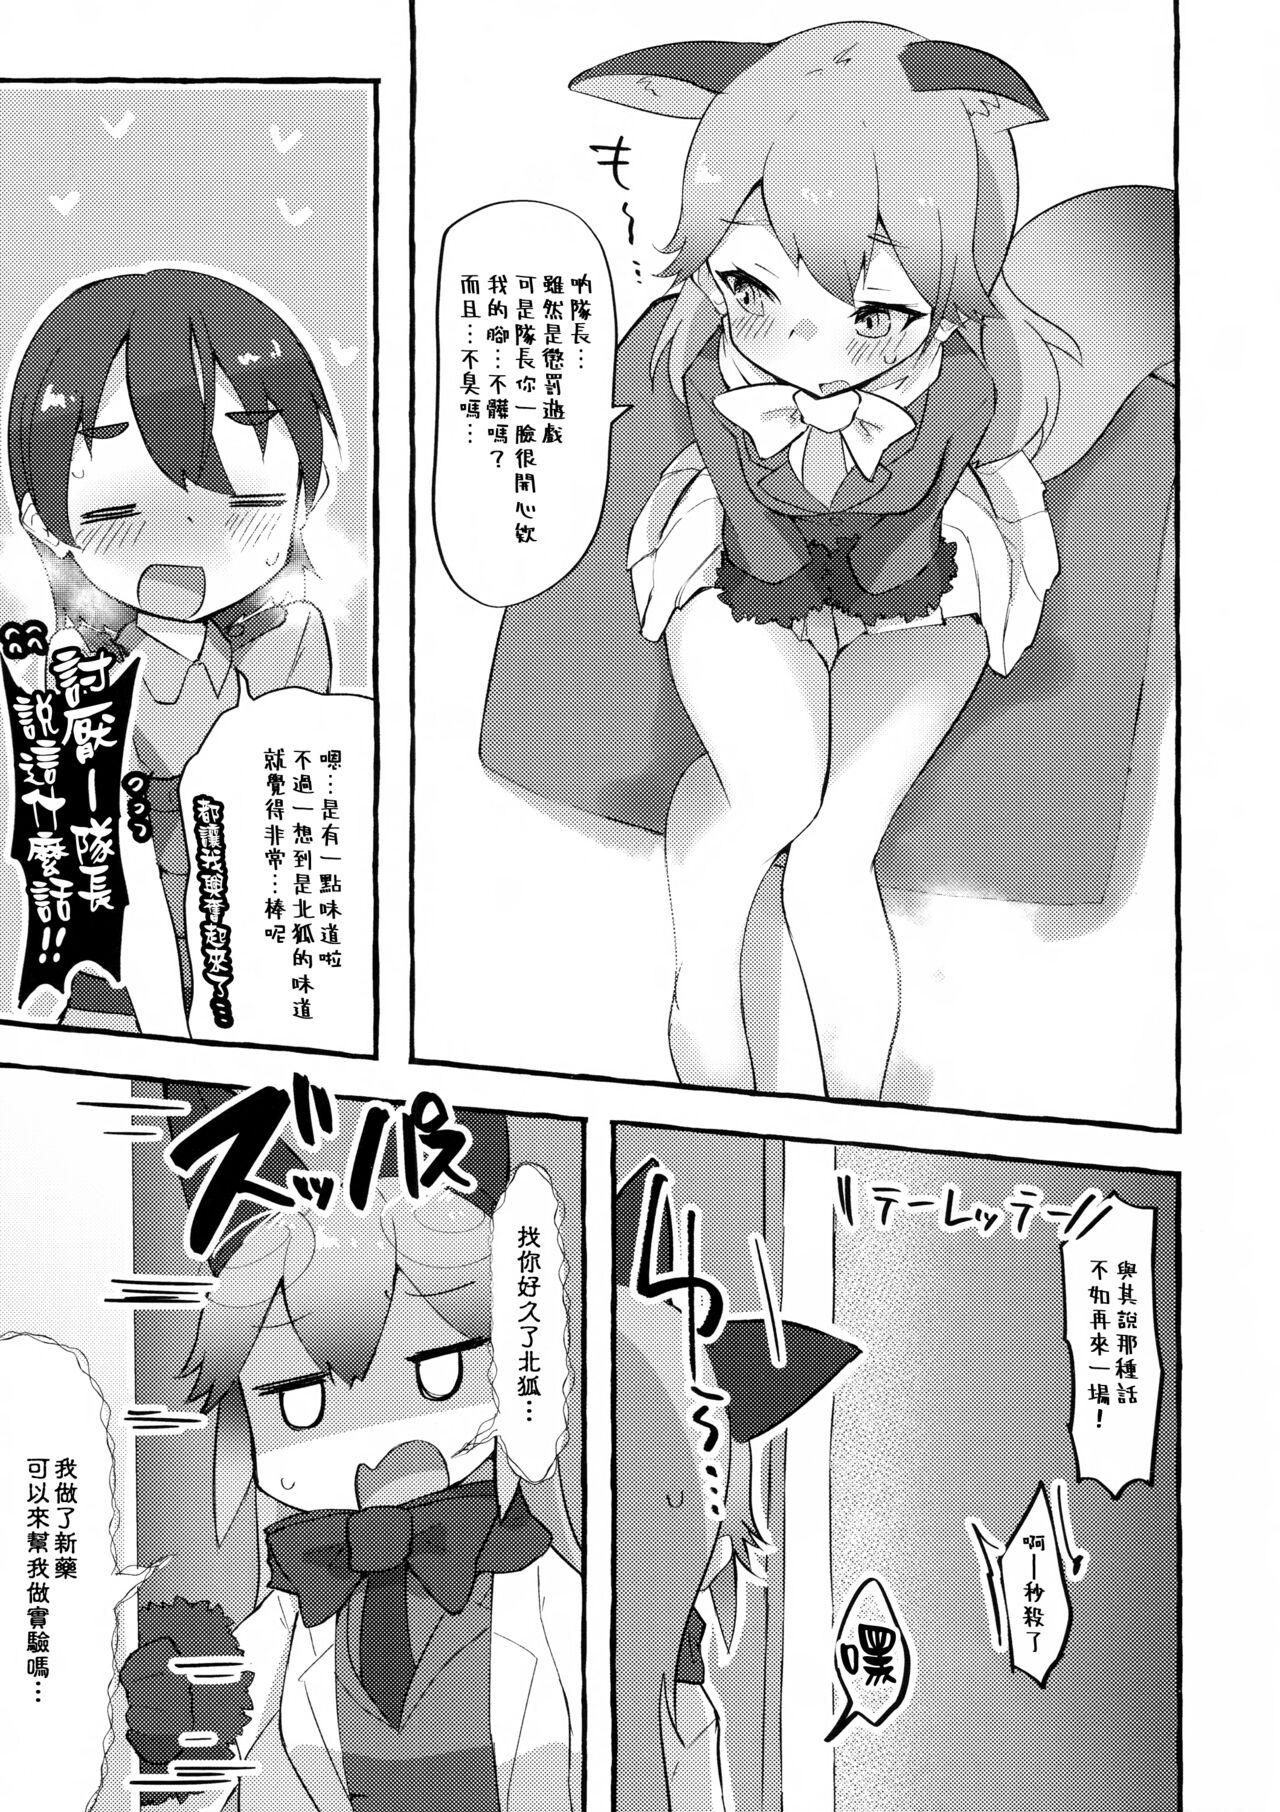 Old And Young Gingitsune Kunkun - Kemono friends Seduction - Page 7